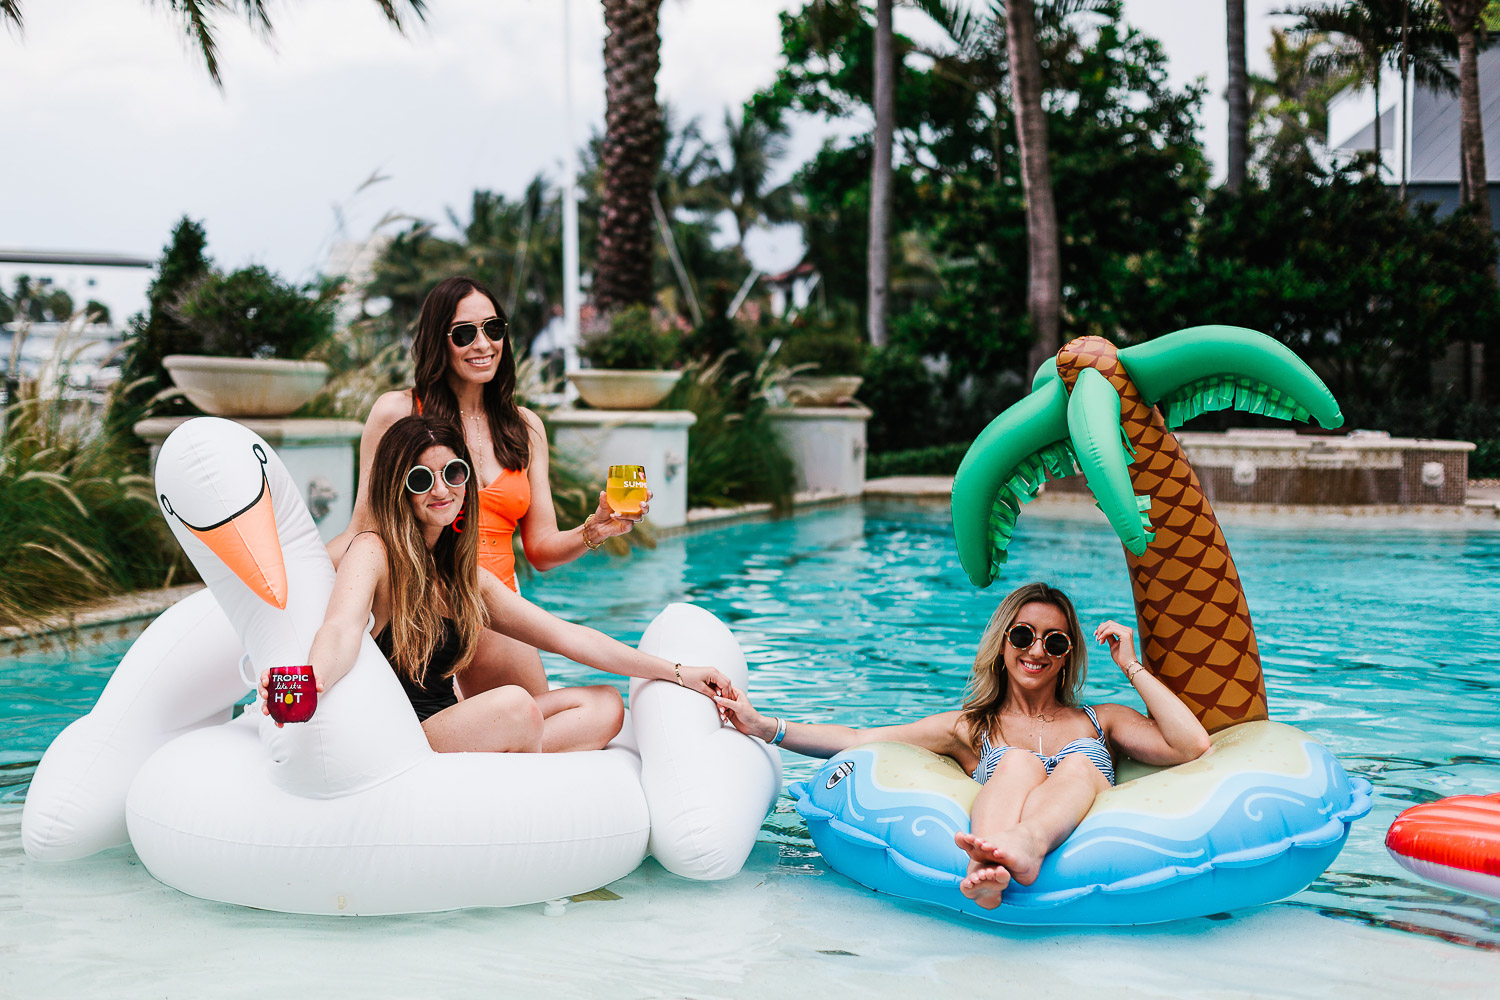 affordable pool floats at Dicks Sporting Goods for your summer pool party